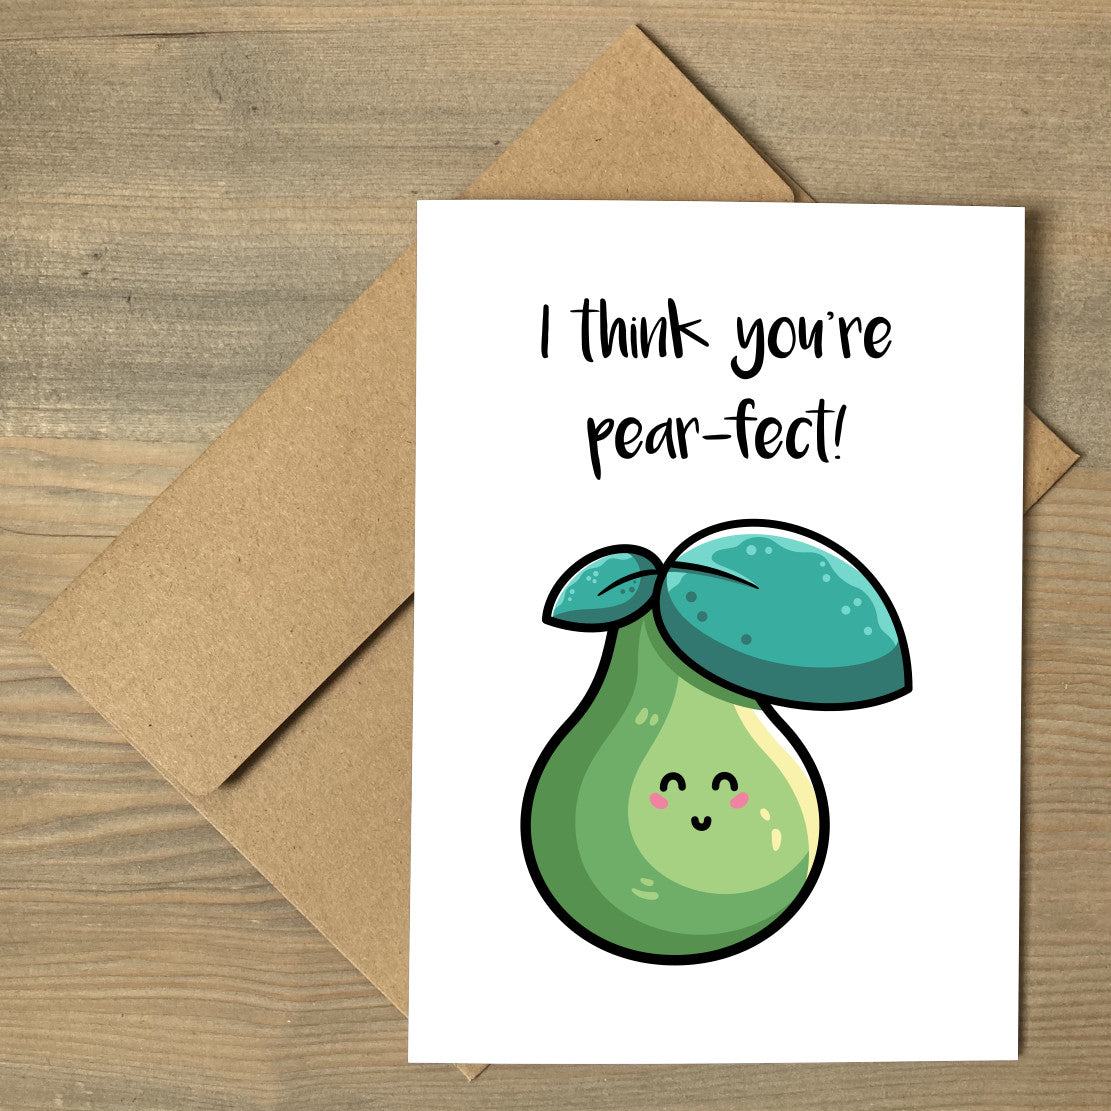 A white greeting card lying flat on a brown envelope, with a design of a kawaii cute green pear and two leaves with wording above reading I think you're pear-fect!